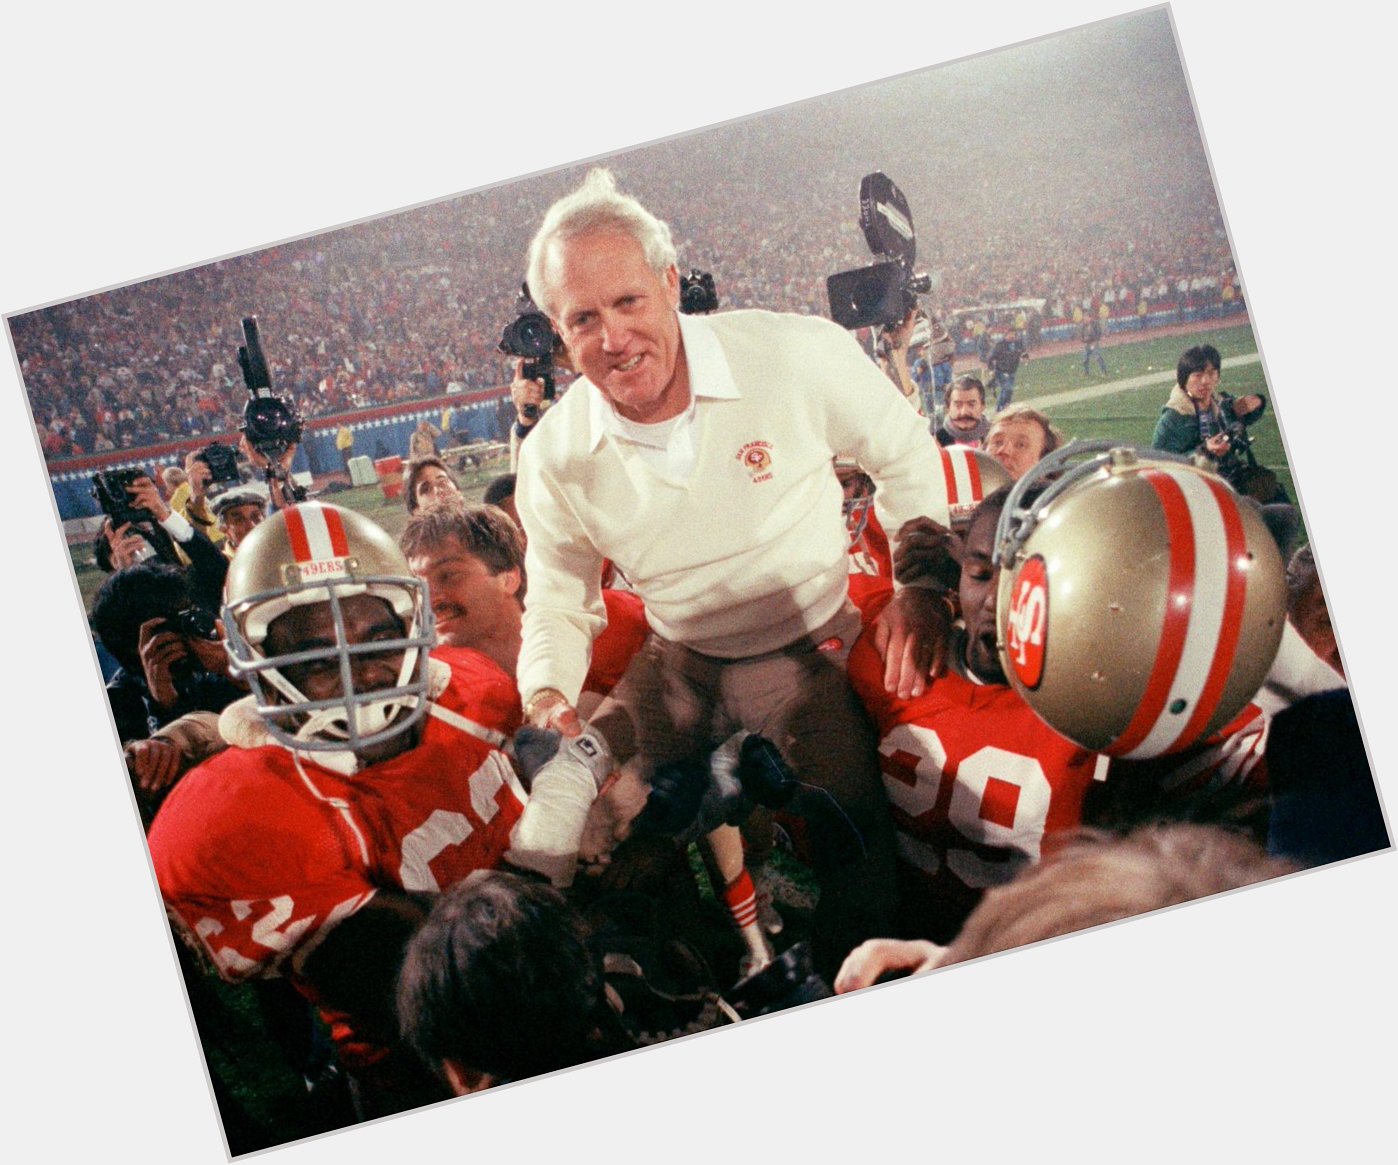 Happy Birthday to Bill Walsh, who would have turned 86 today! 